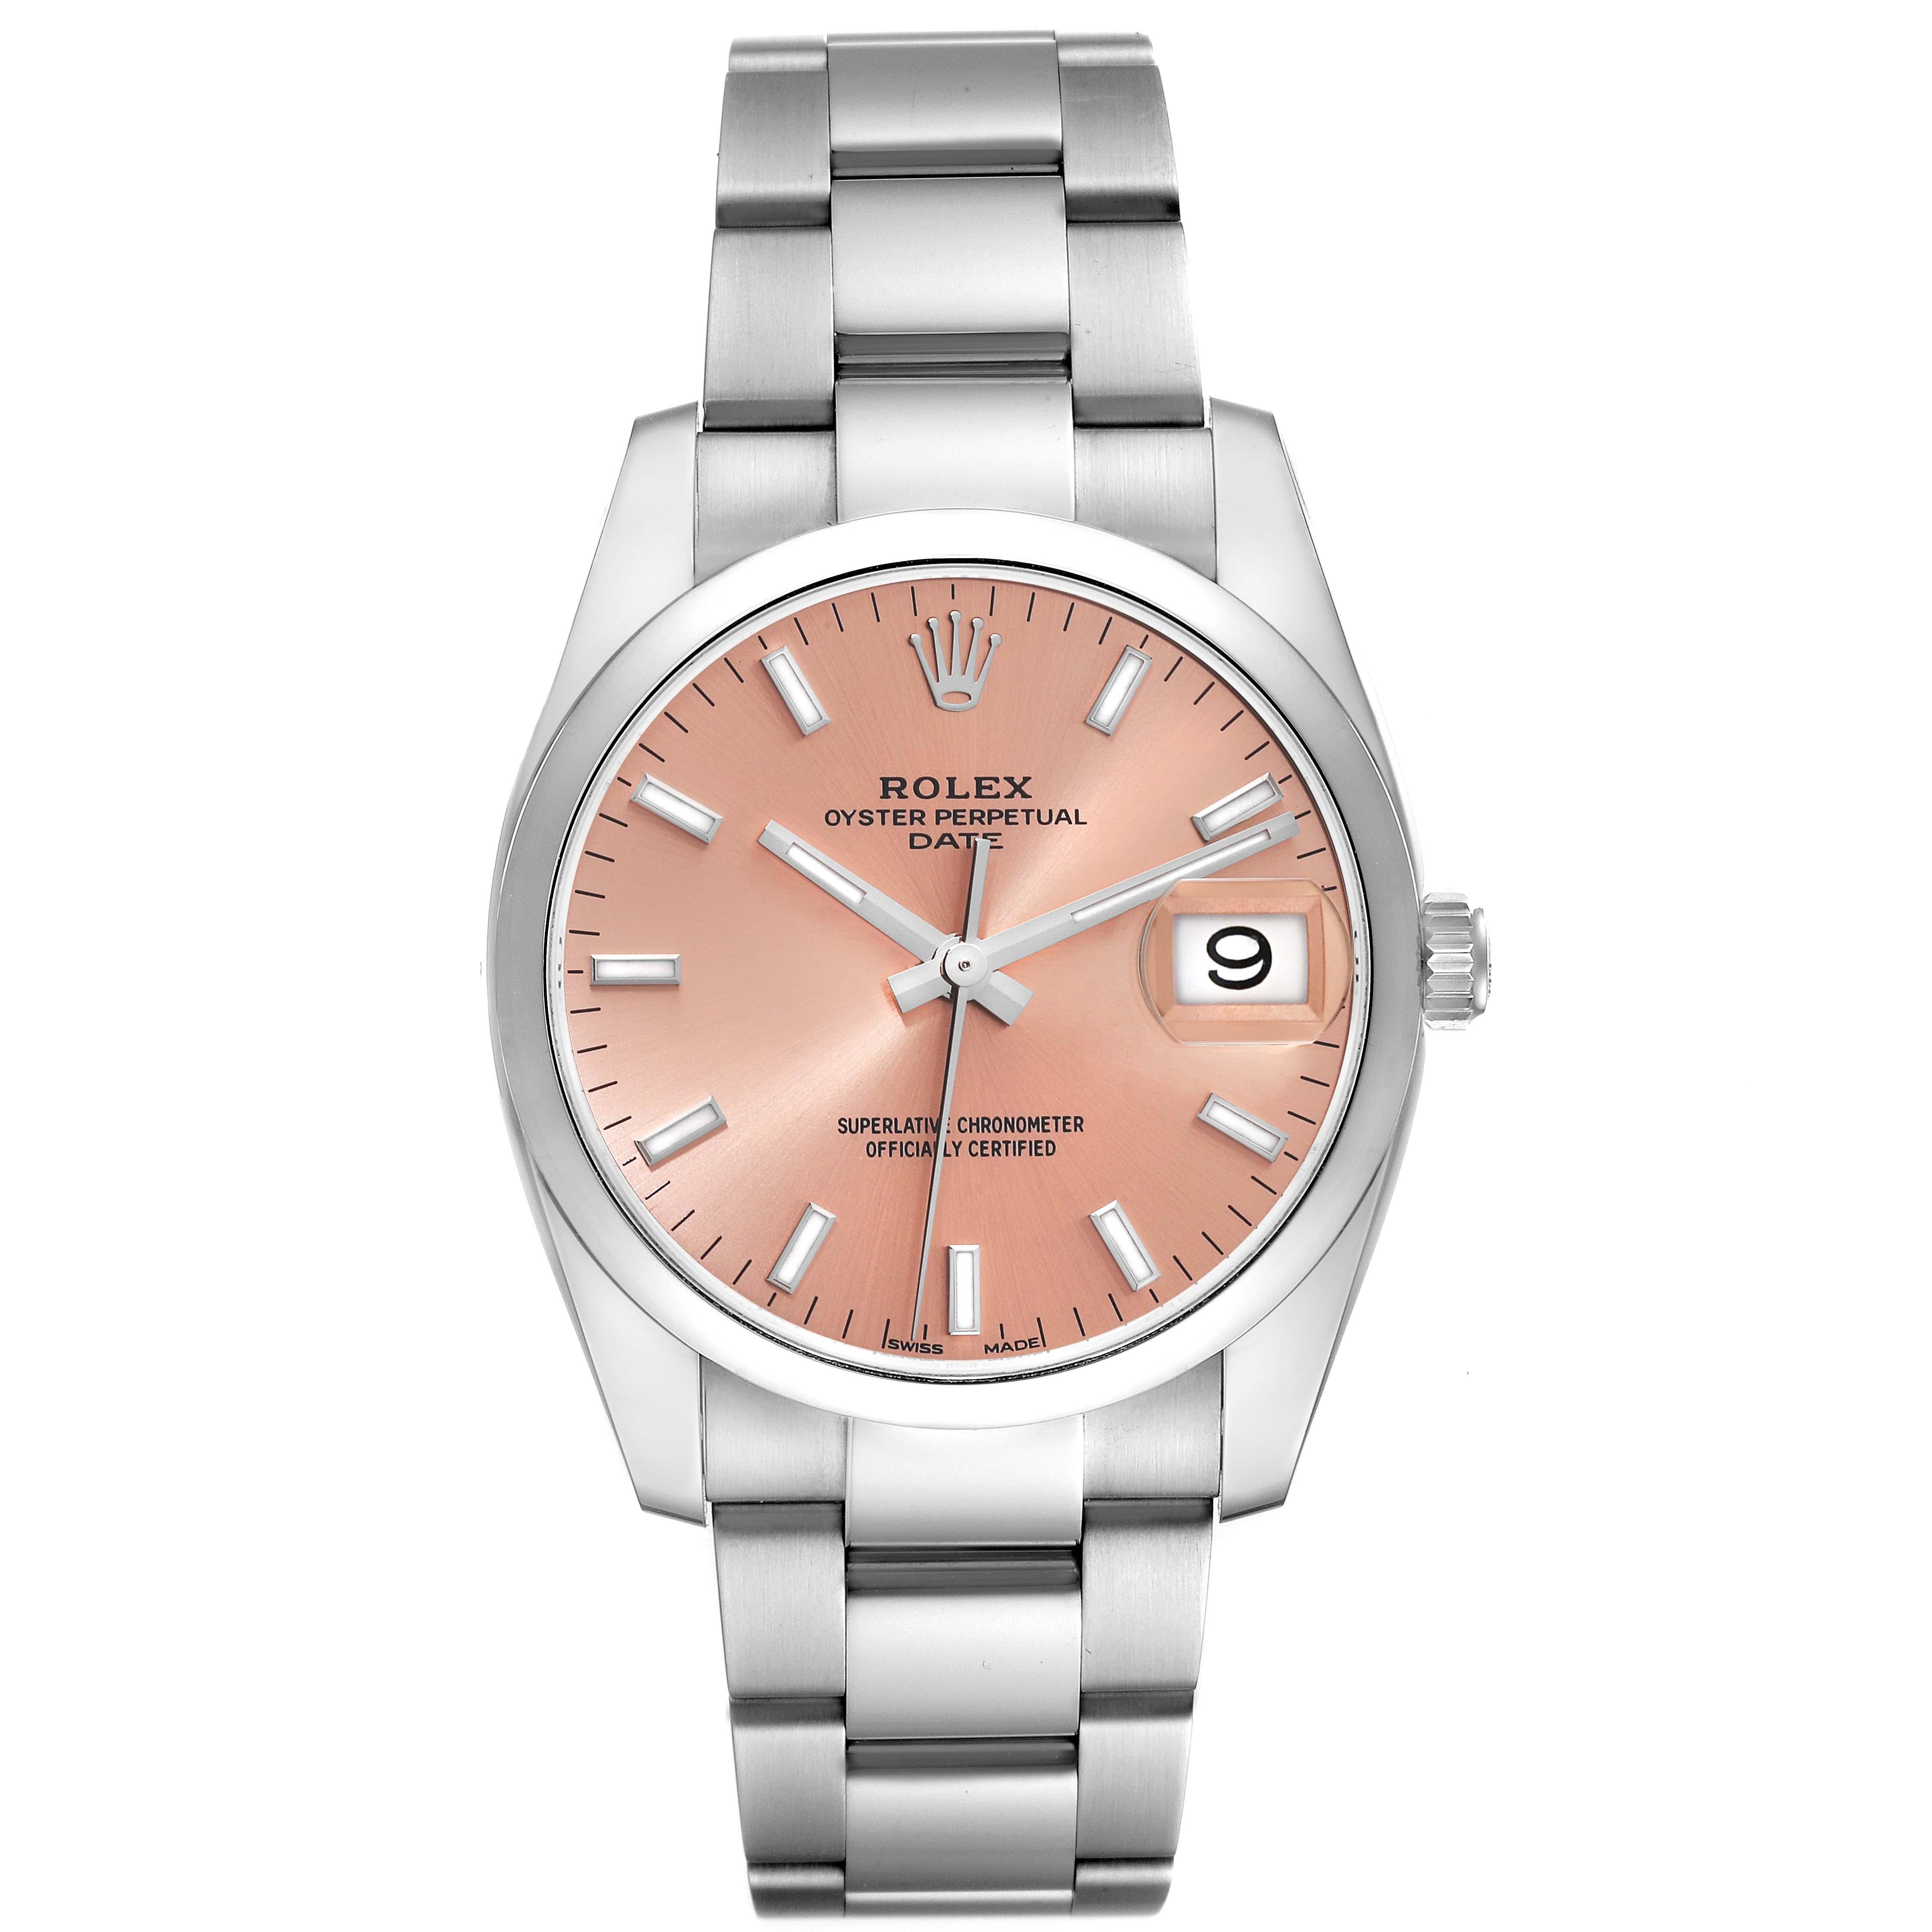 Rolex Date Salmon Dial Oyster Bracelet Steel Mens Watch 115200 Box Card. Officially certified chronometer automatic self-winding movement. Stainless steel case 34.0 mm in diameter. Rolex logo on a crown. Stainless steel smooth domed bezel. Scratch